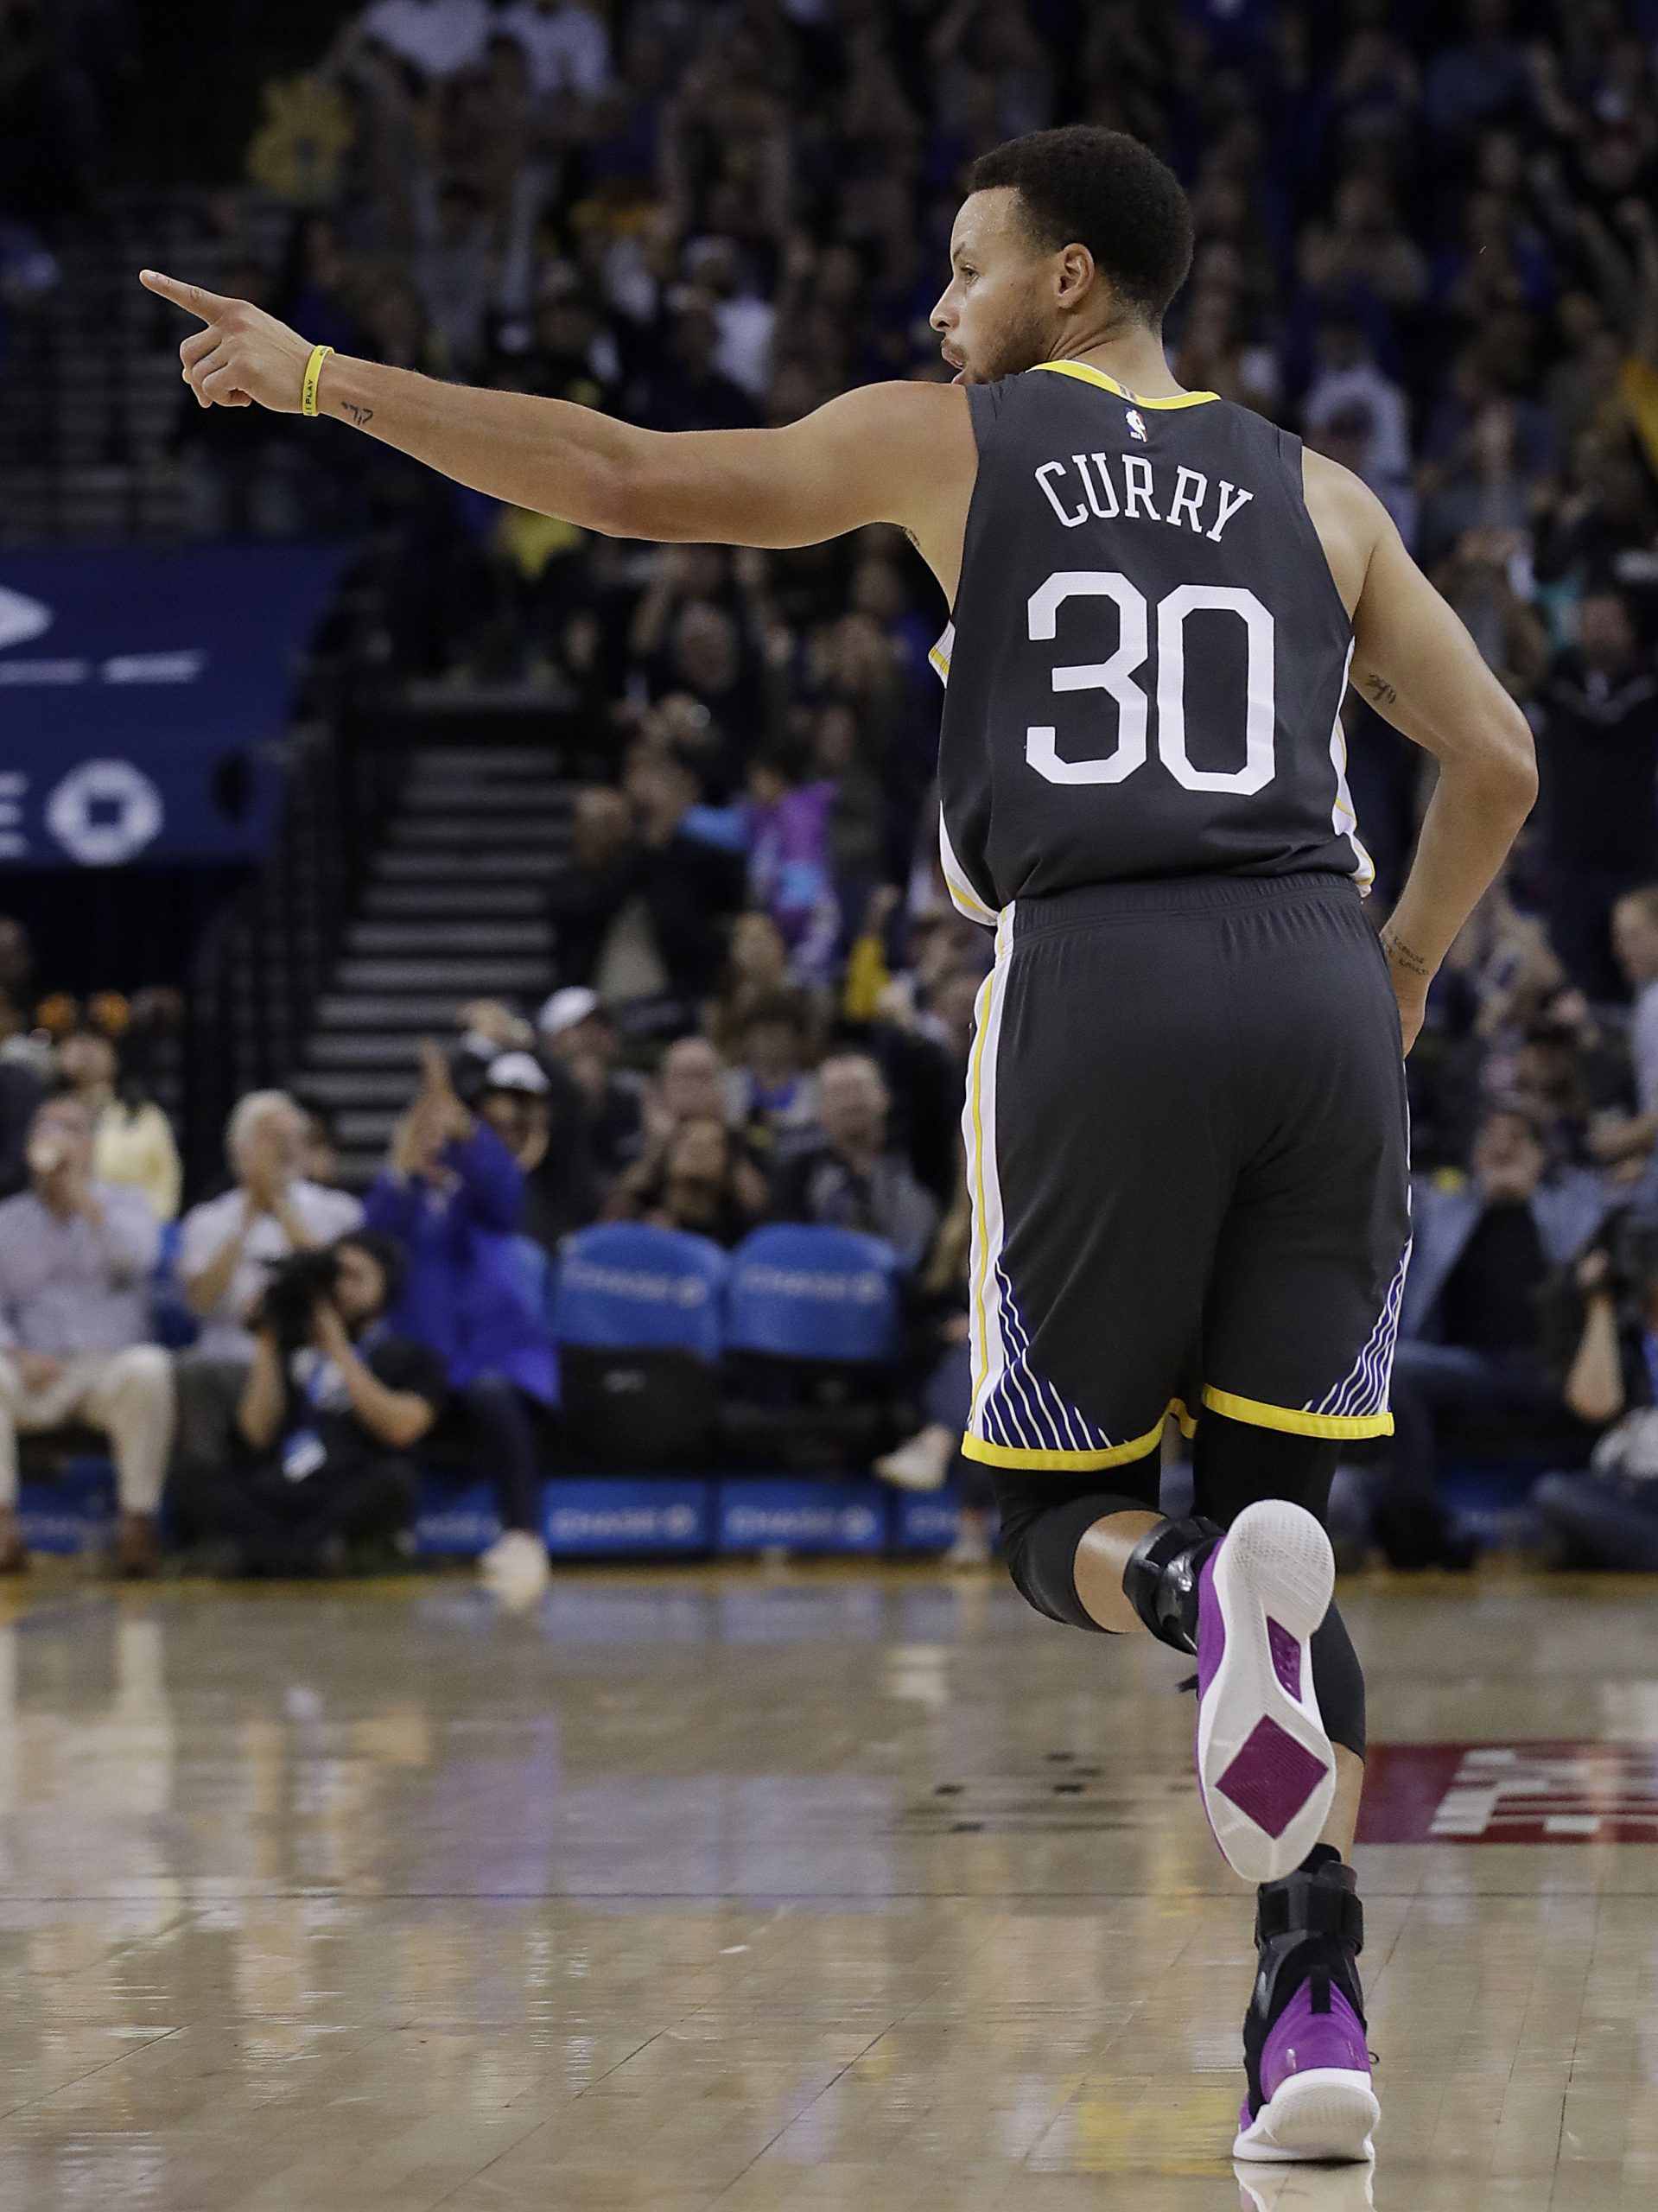 Record-breaker Stephen Curry’s season so far for the Golden State Warriors